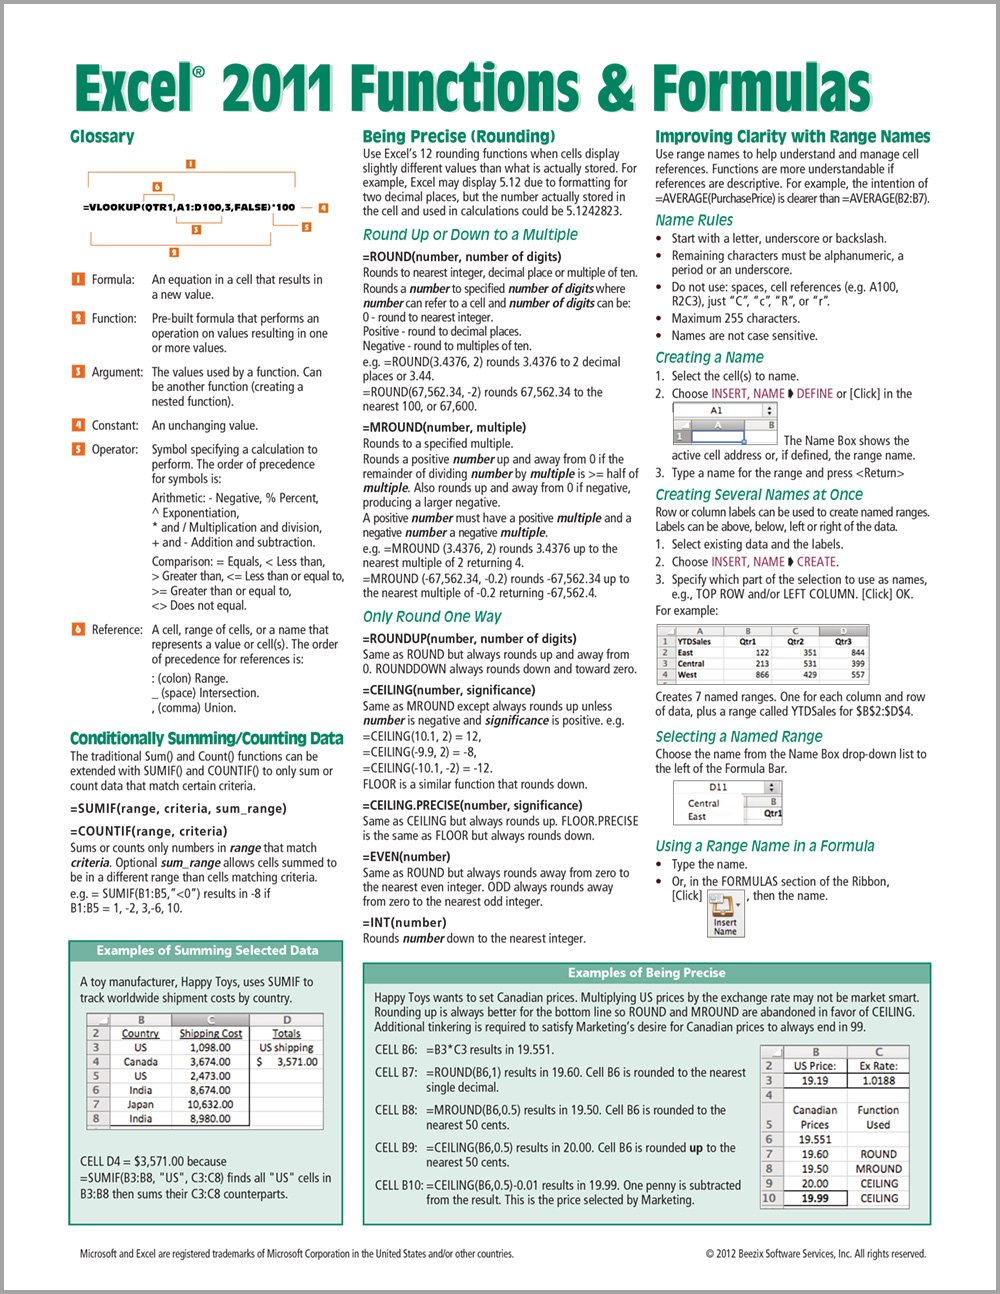 Excel 2011 for Mac: Functions & Formulas Quick Reference Guide (4-page Cheat Sheet focusing on examples and context for intermediate-to-advanced functions and formulas - Laminated Guide)